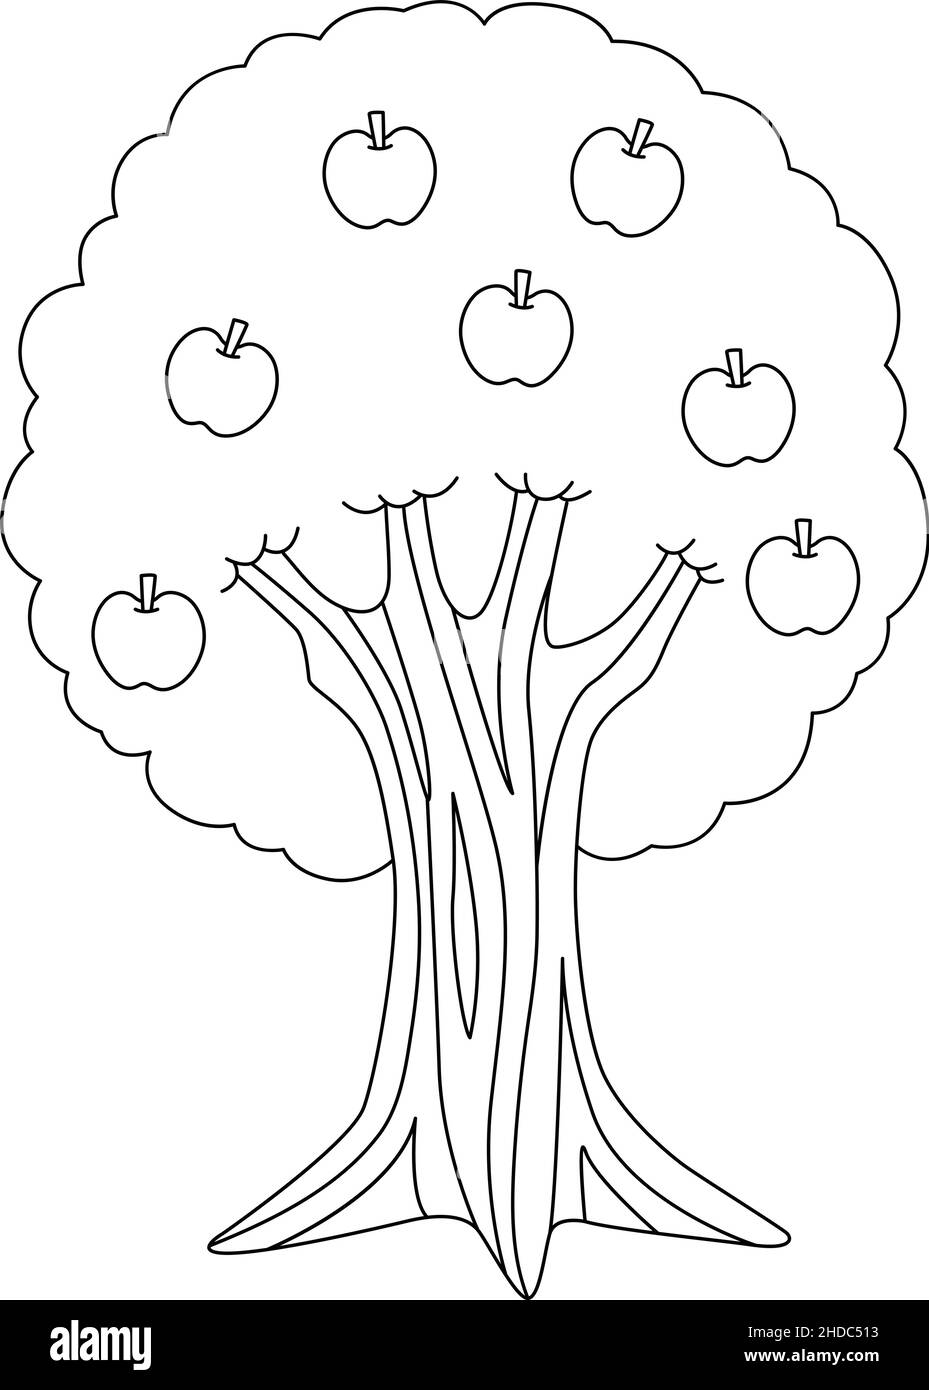 Apple Tree Coloring Page Isolated for Kids Stock Vector Image ...